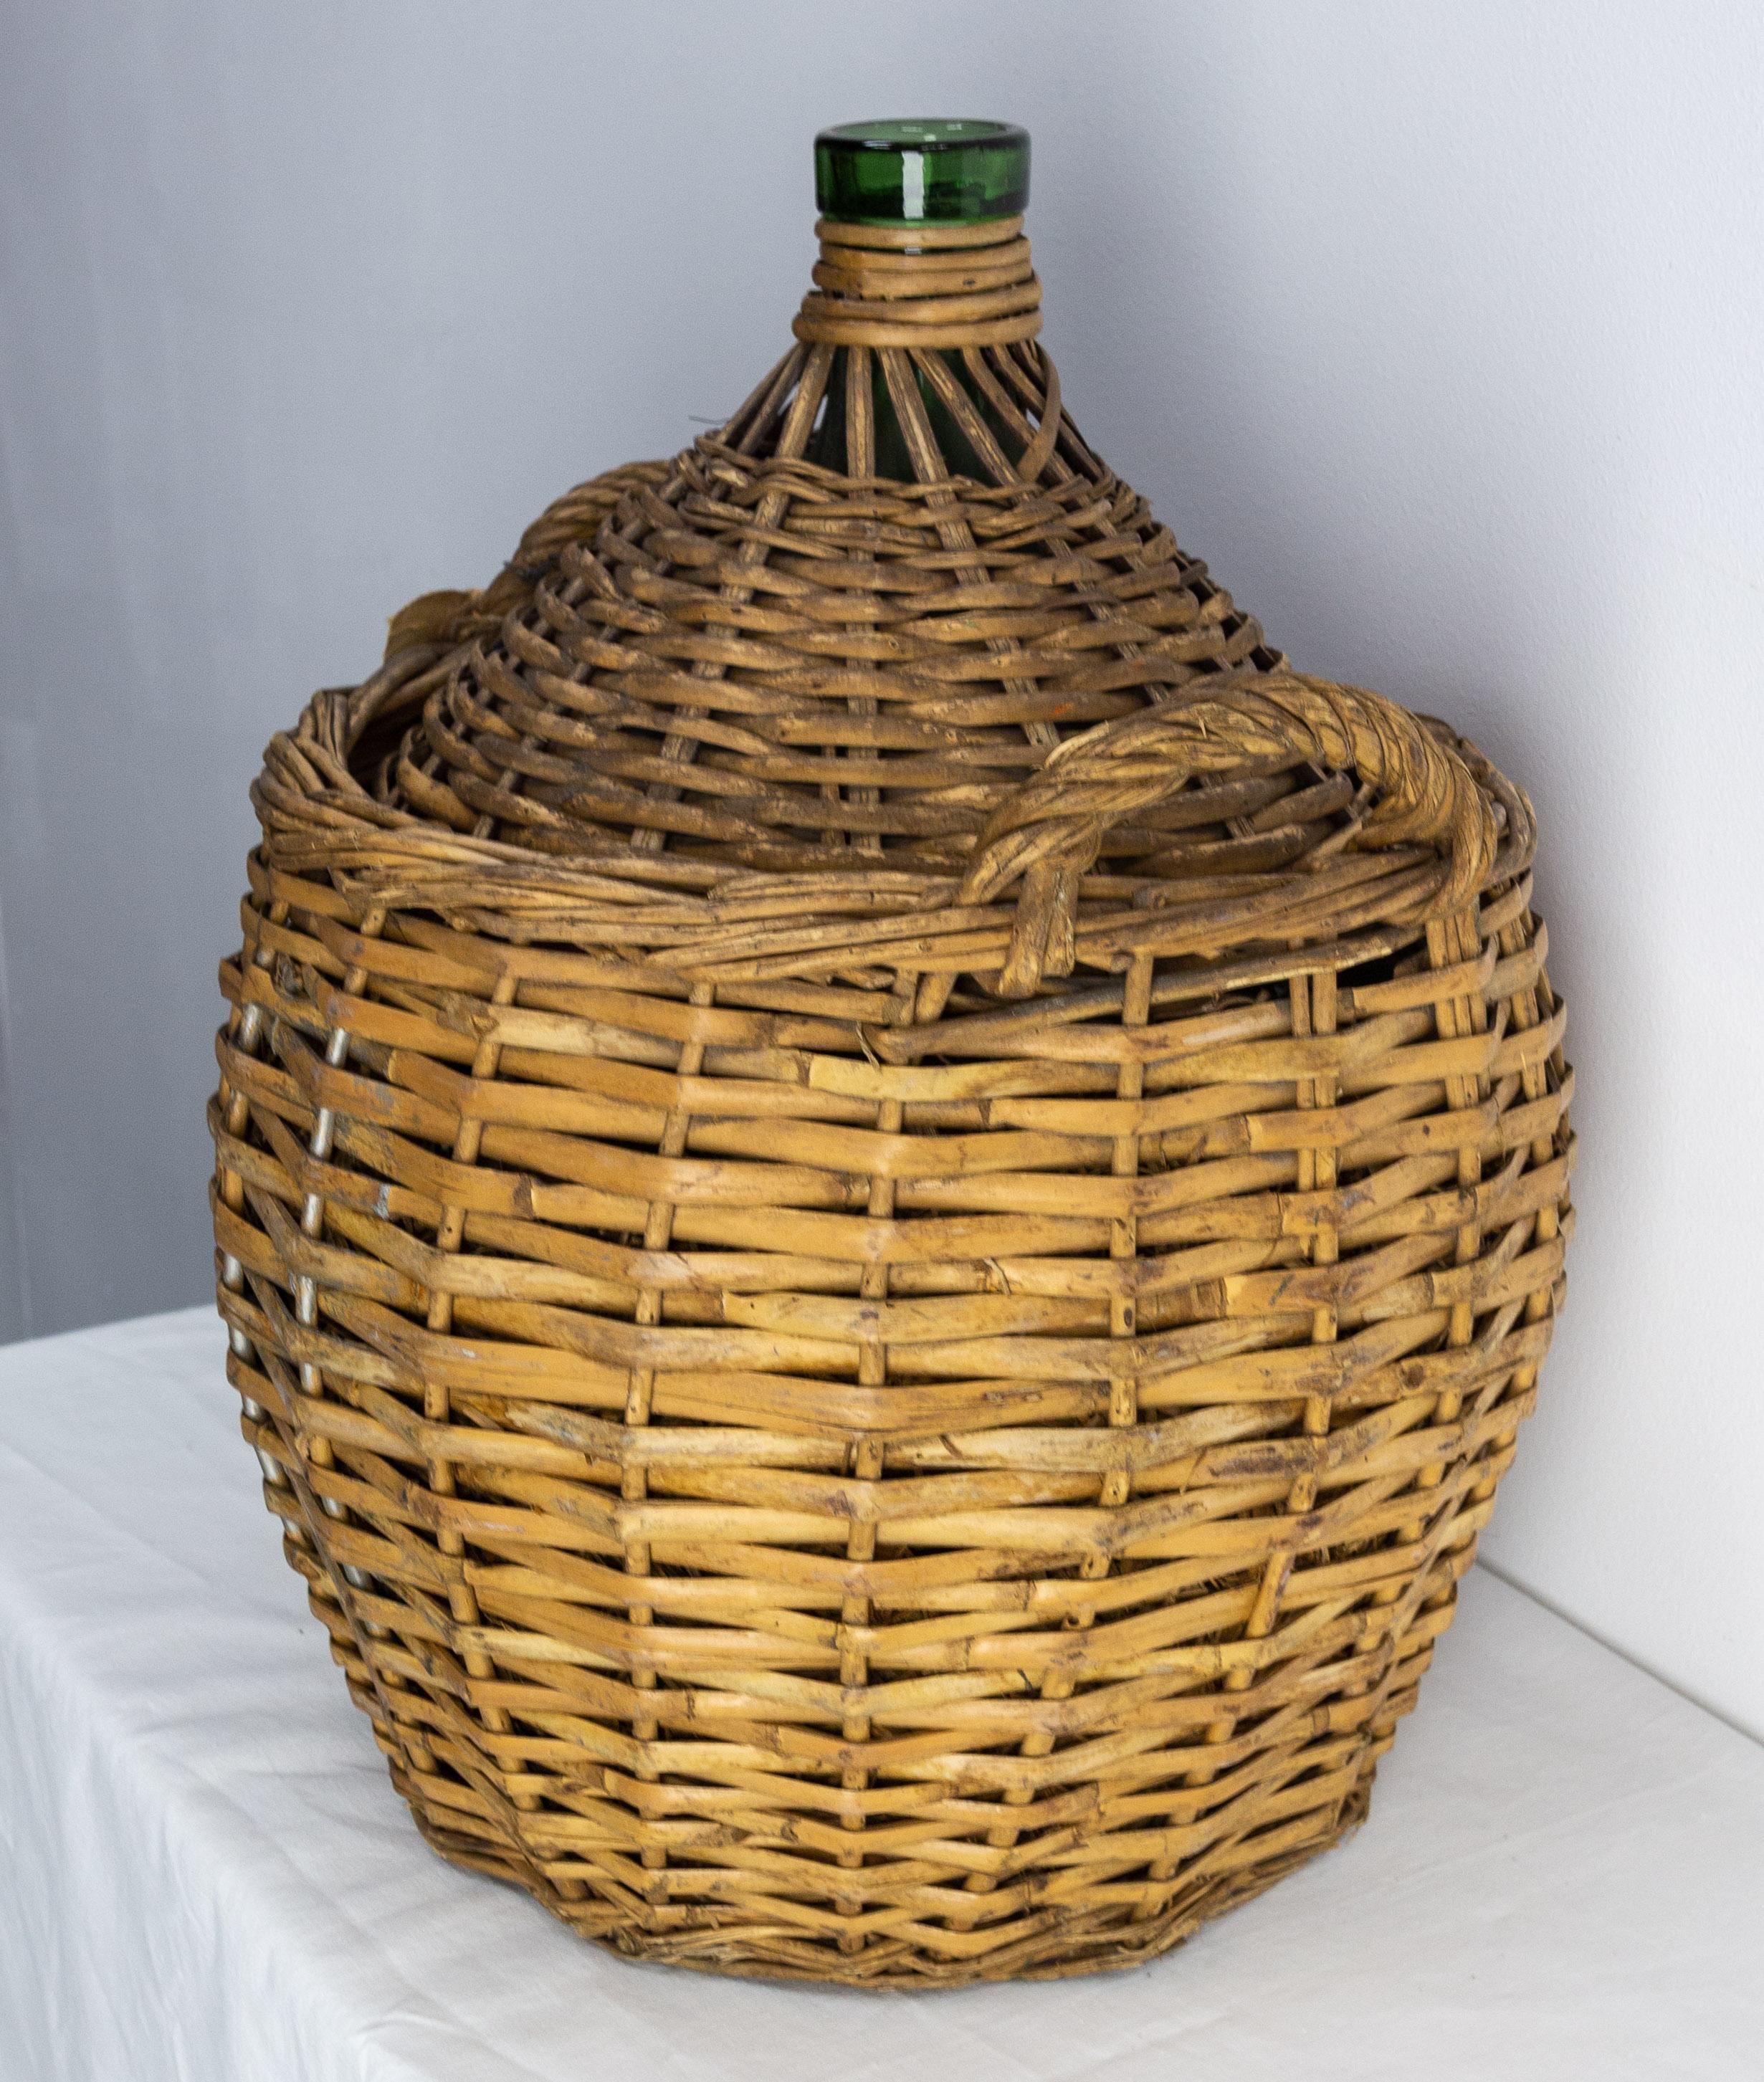 French Provincial Antique Greenglass Bottle Demijohns or Carboy in Authentic Wicker Basket, France For Sale